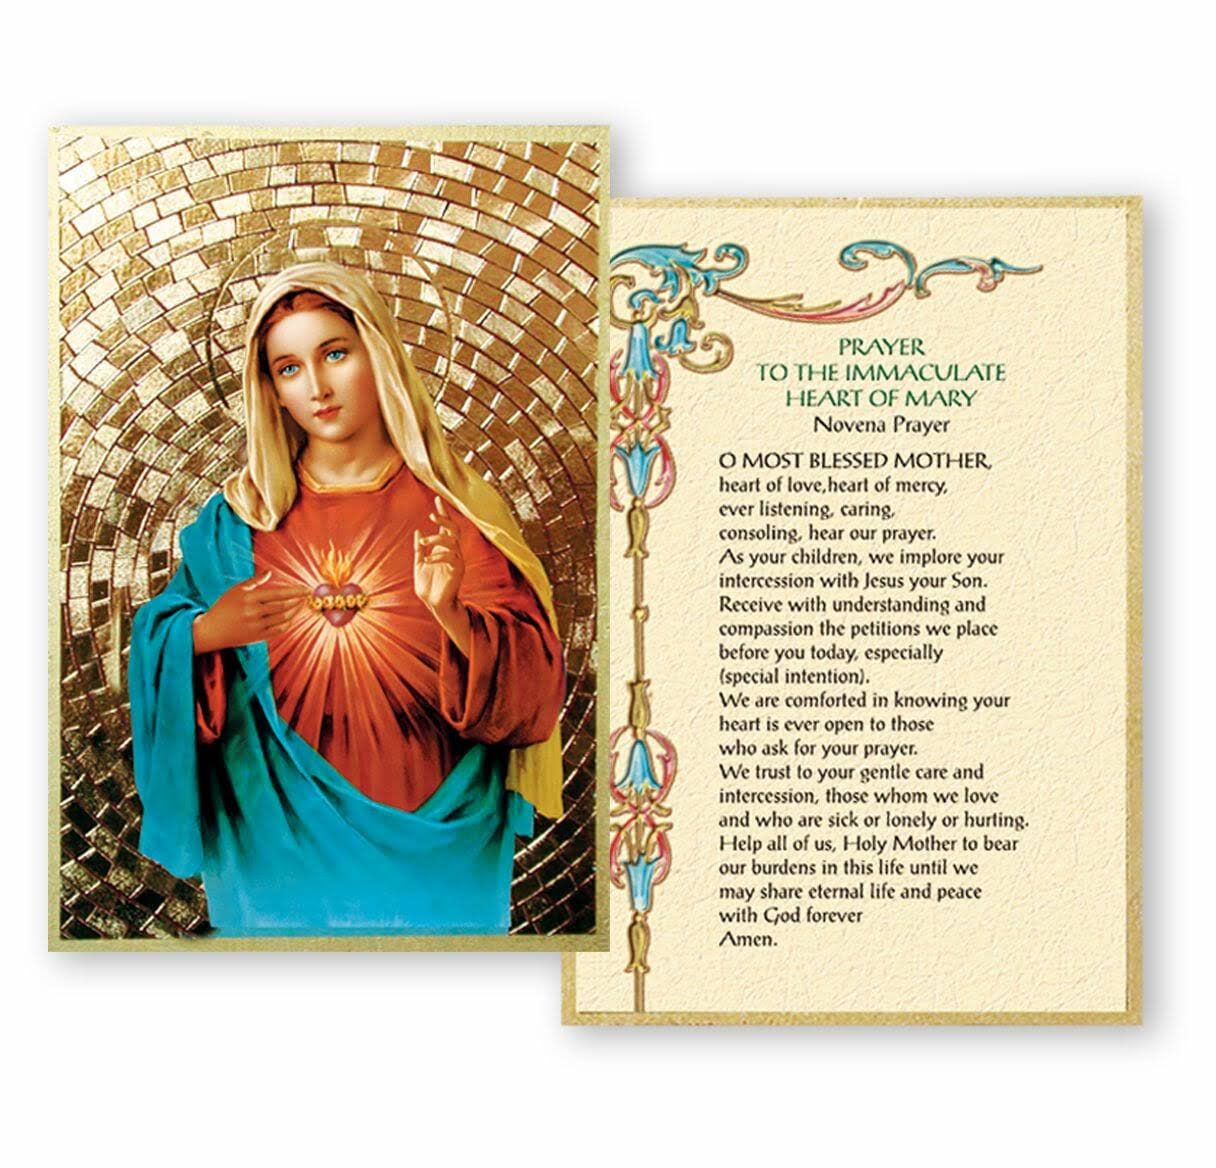 Immaculate Heart of Mary Mosaic Wall Plaque - with Prayer